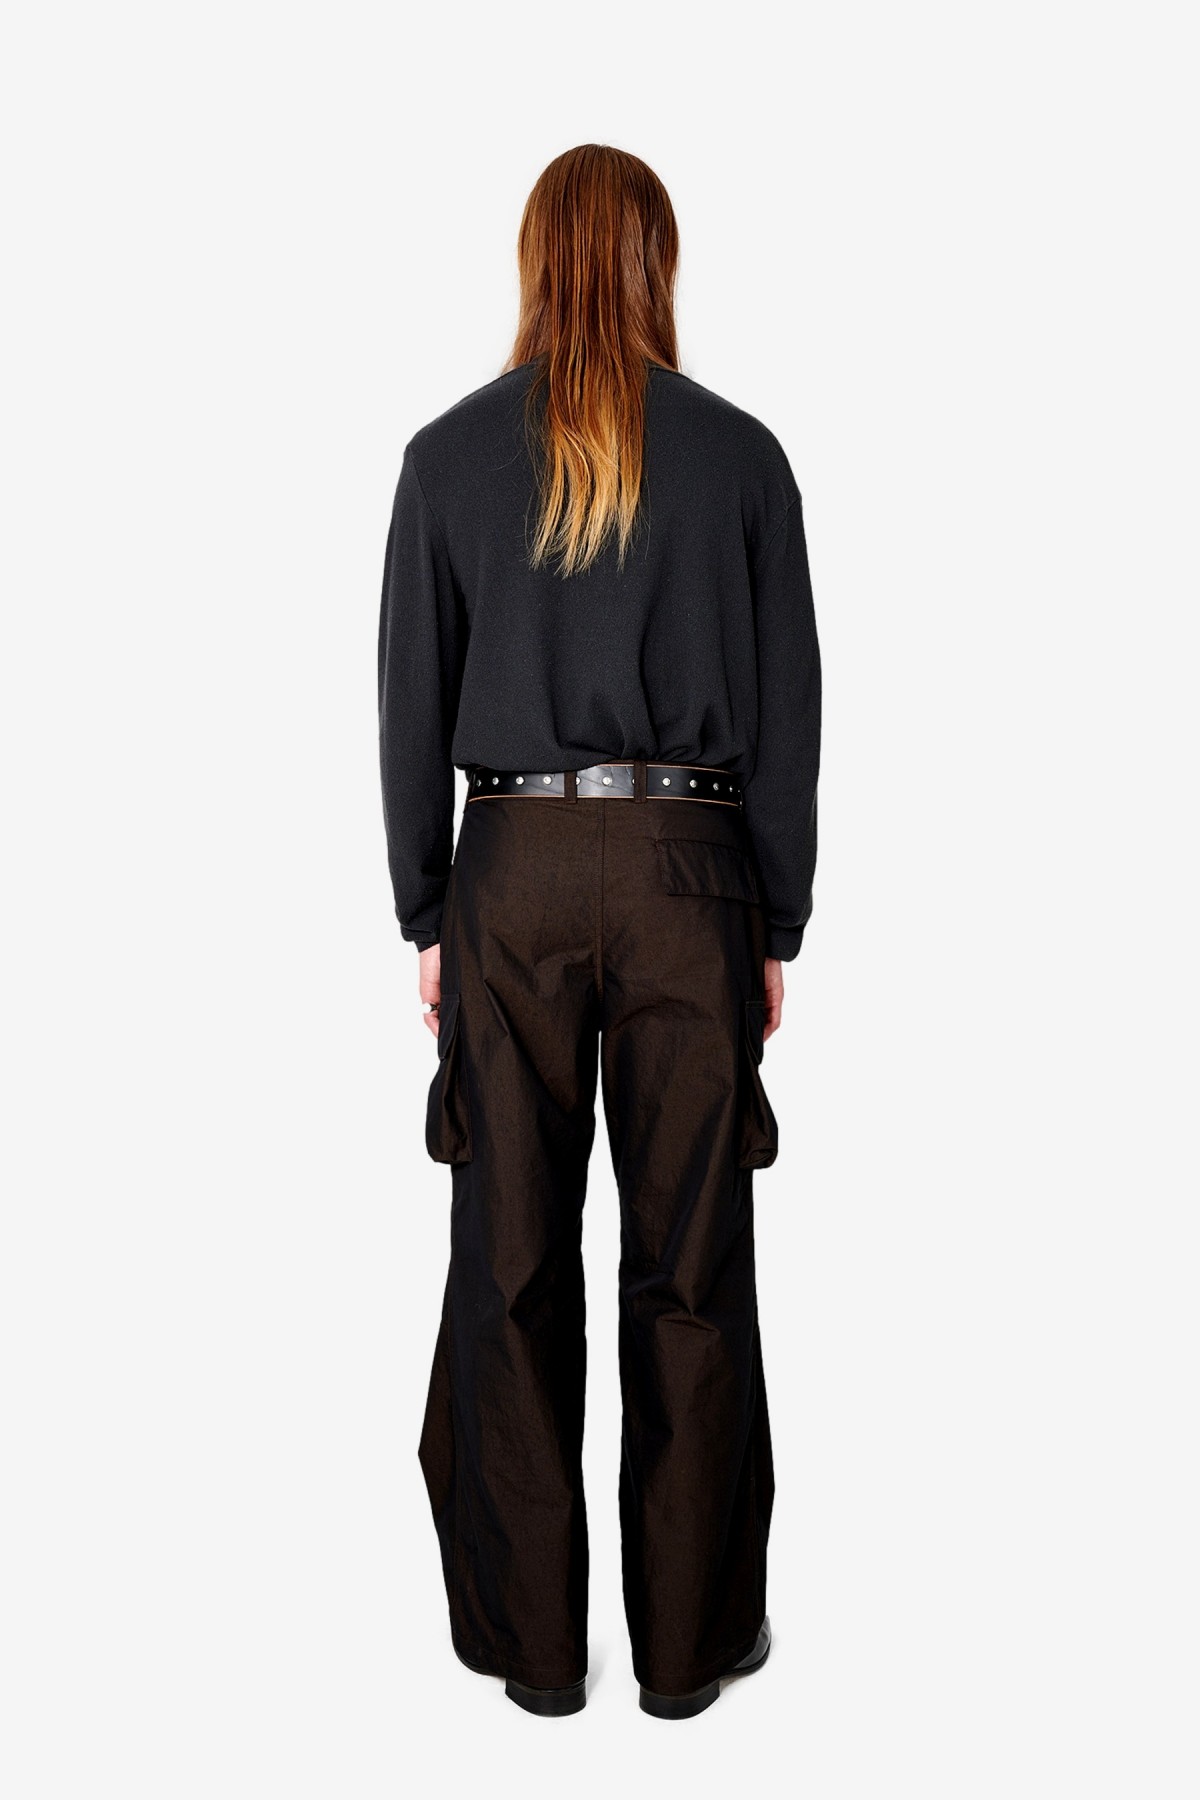 Our Legacy Mount Trouser in Black High Twist Solaro